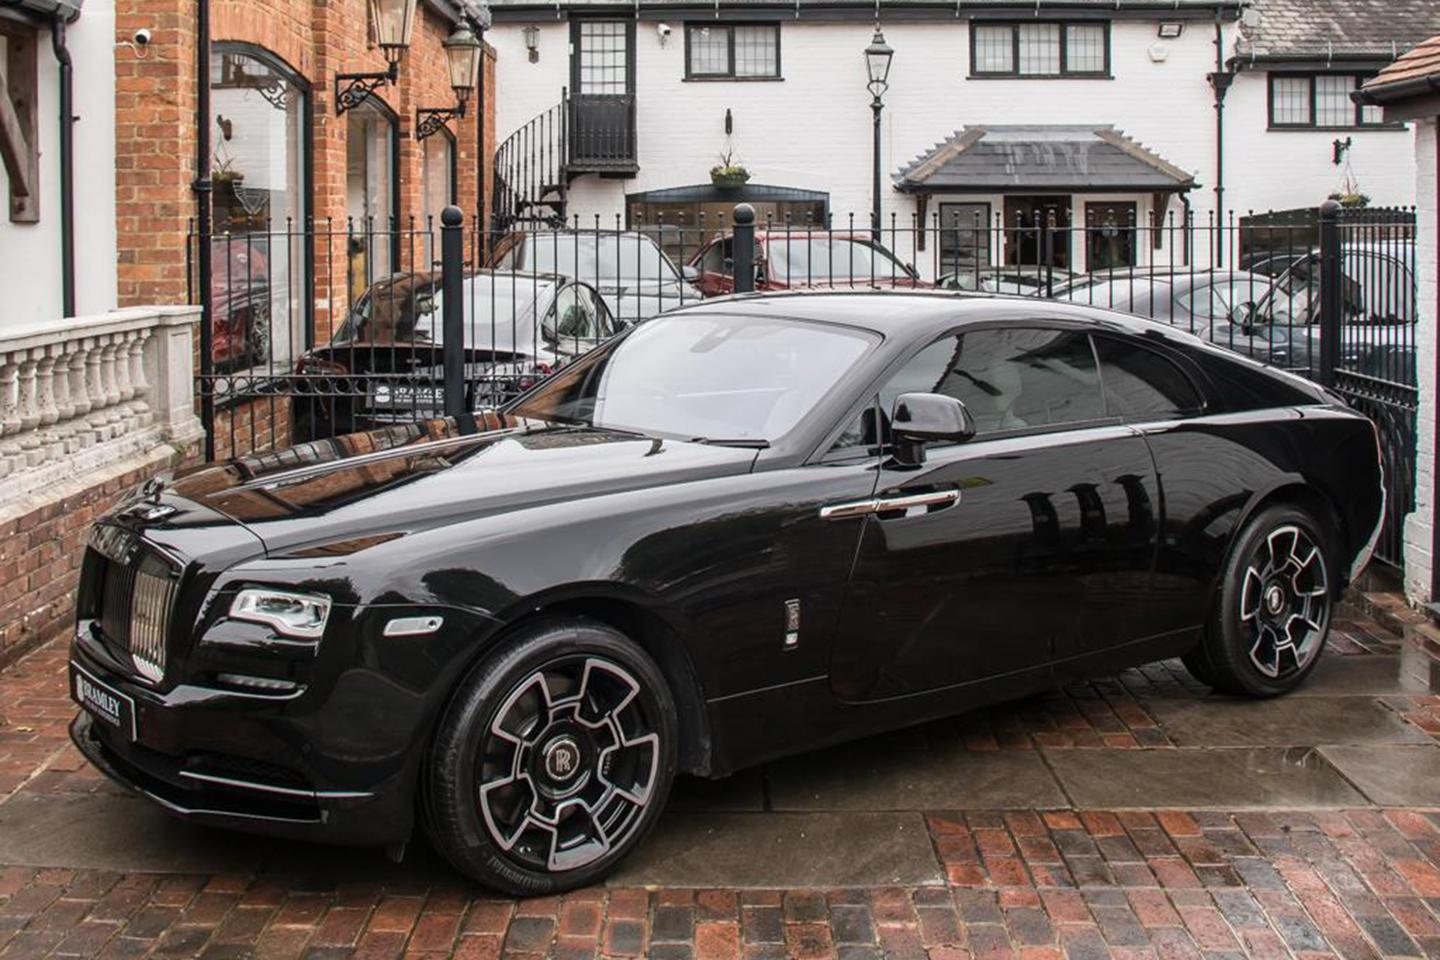 Great British Drives around Charles Dickenss Kent in a RollsRoyce Wraith